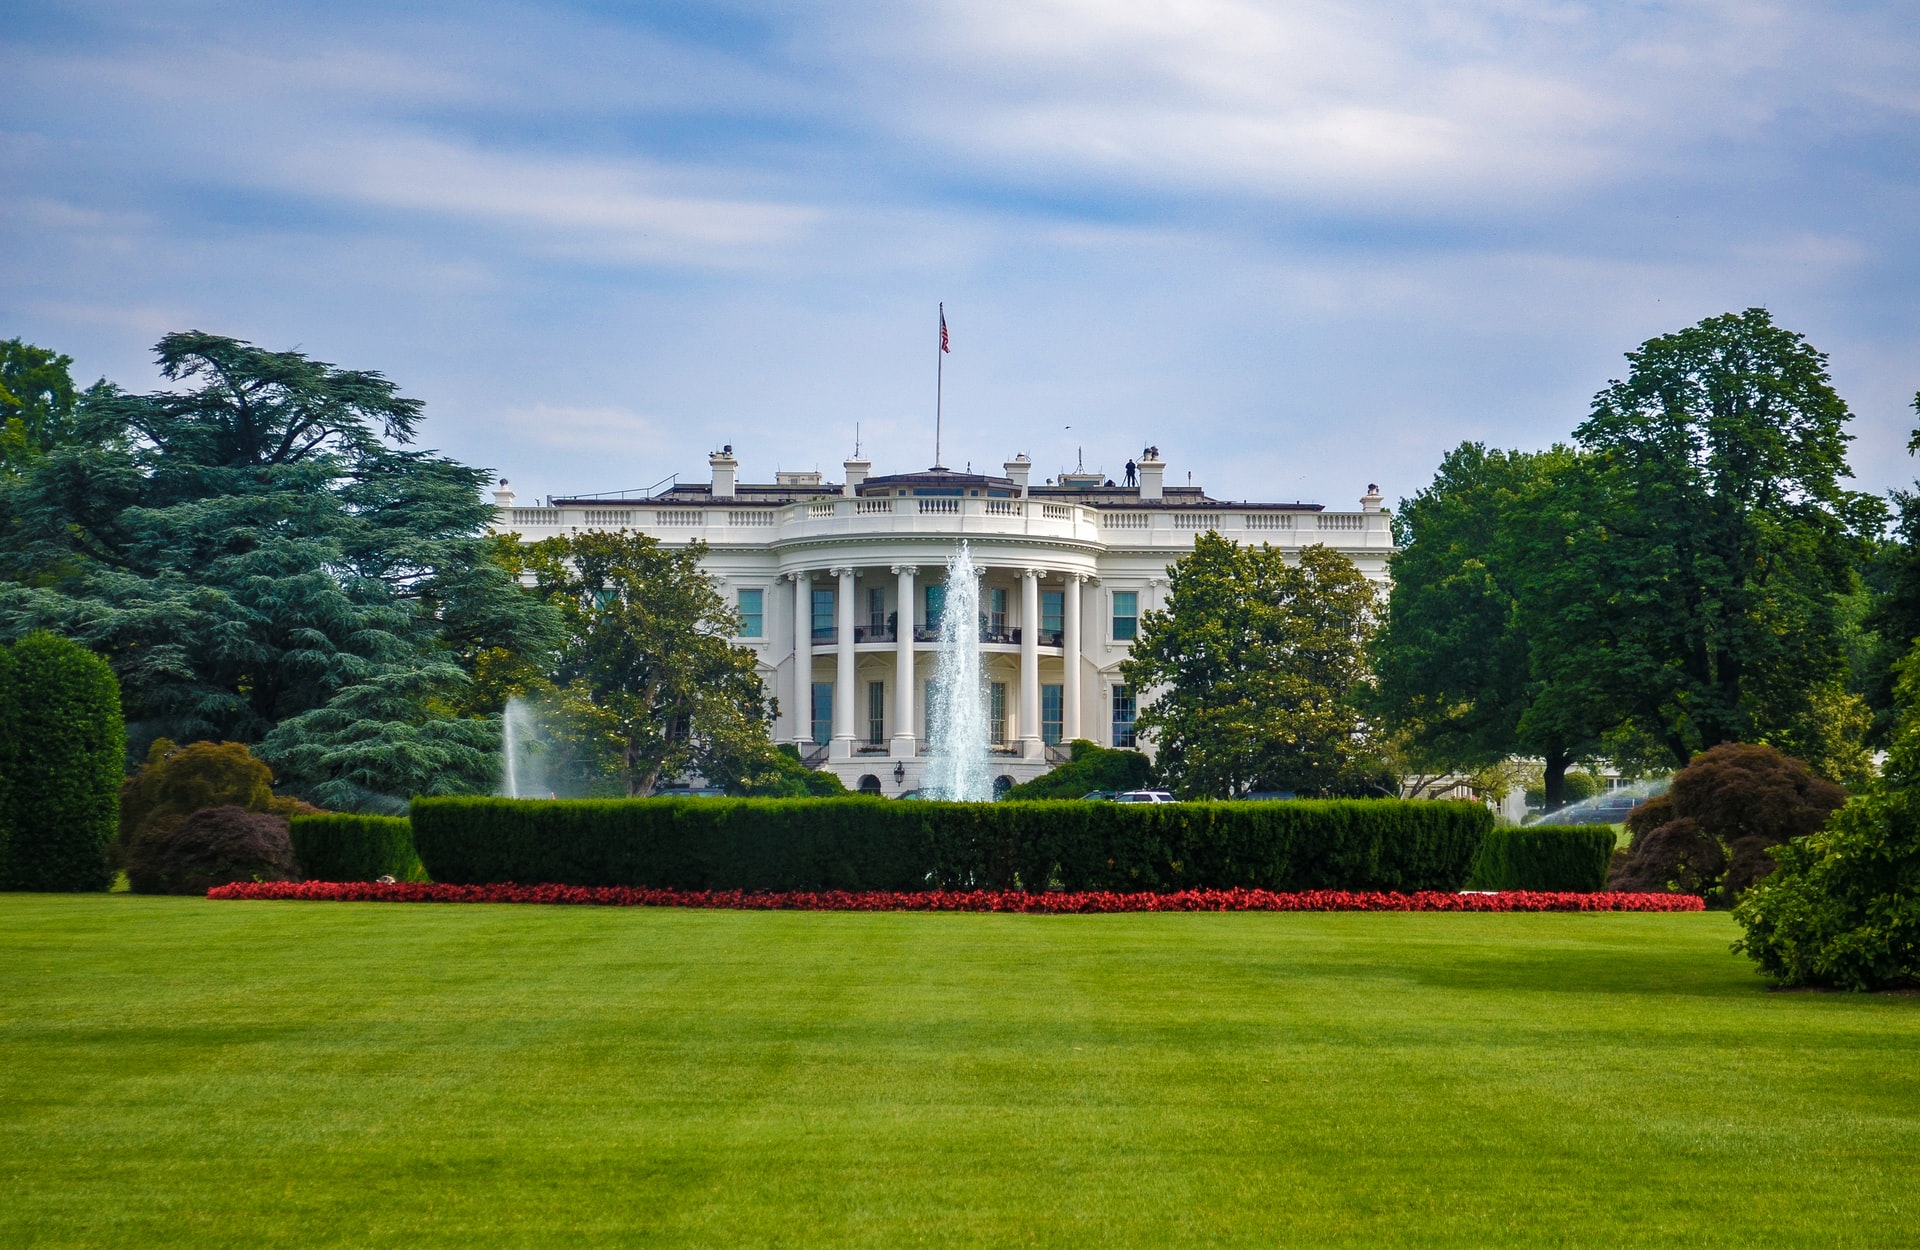 White House Joins Insurance, Finance, Big Tech to Combat Cybersecurity Threats